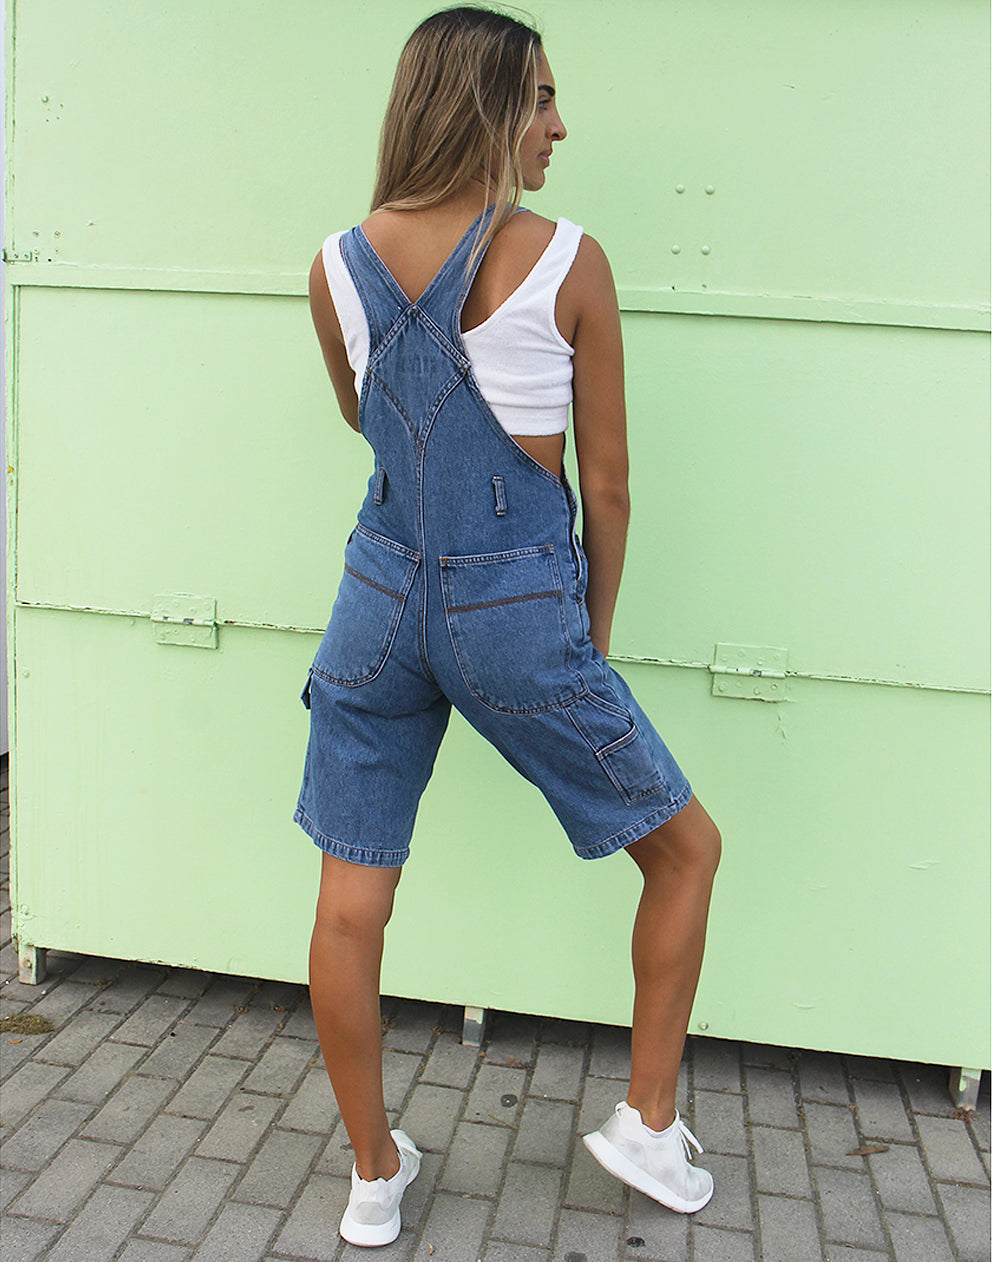 Levis Dungarees - Buy Levis Dungarees online in India